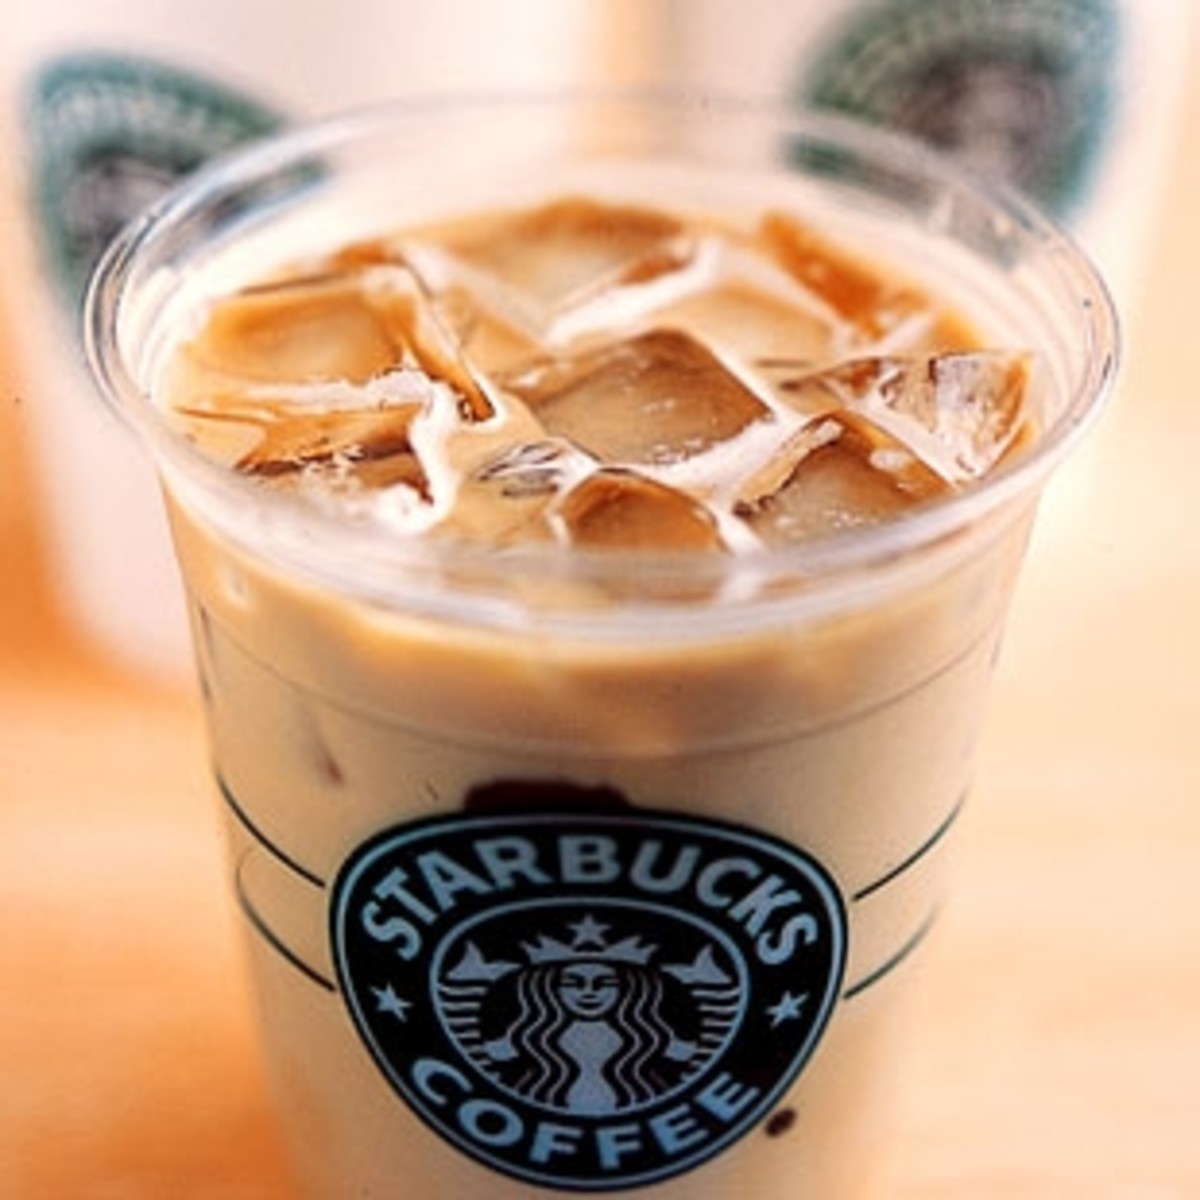 Mmmm...Iced Lattes...wouldn't it be nice to make one at home??